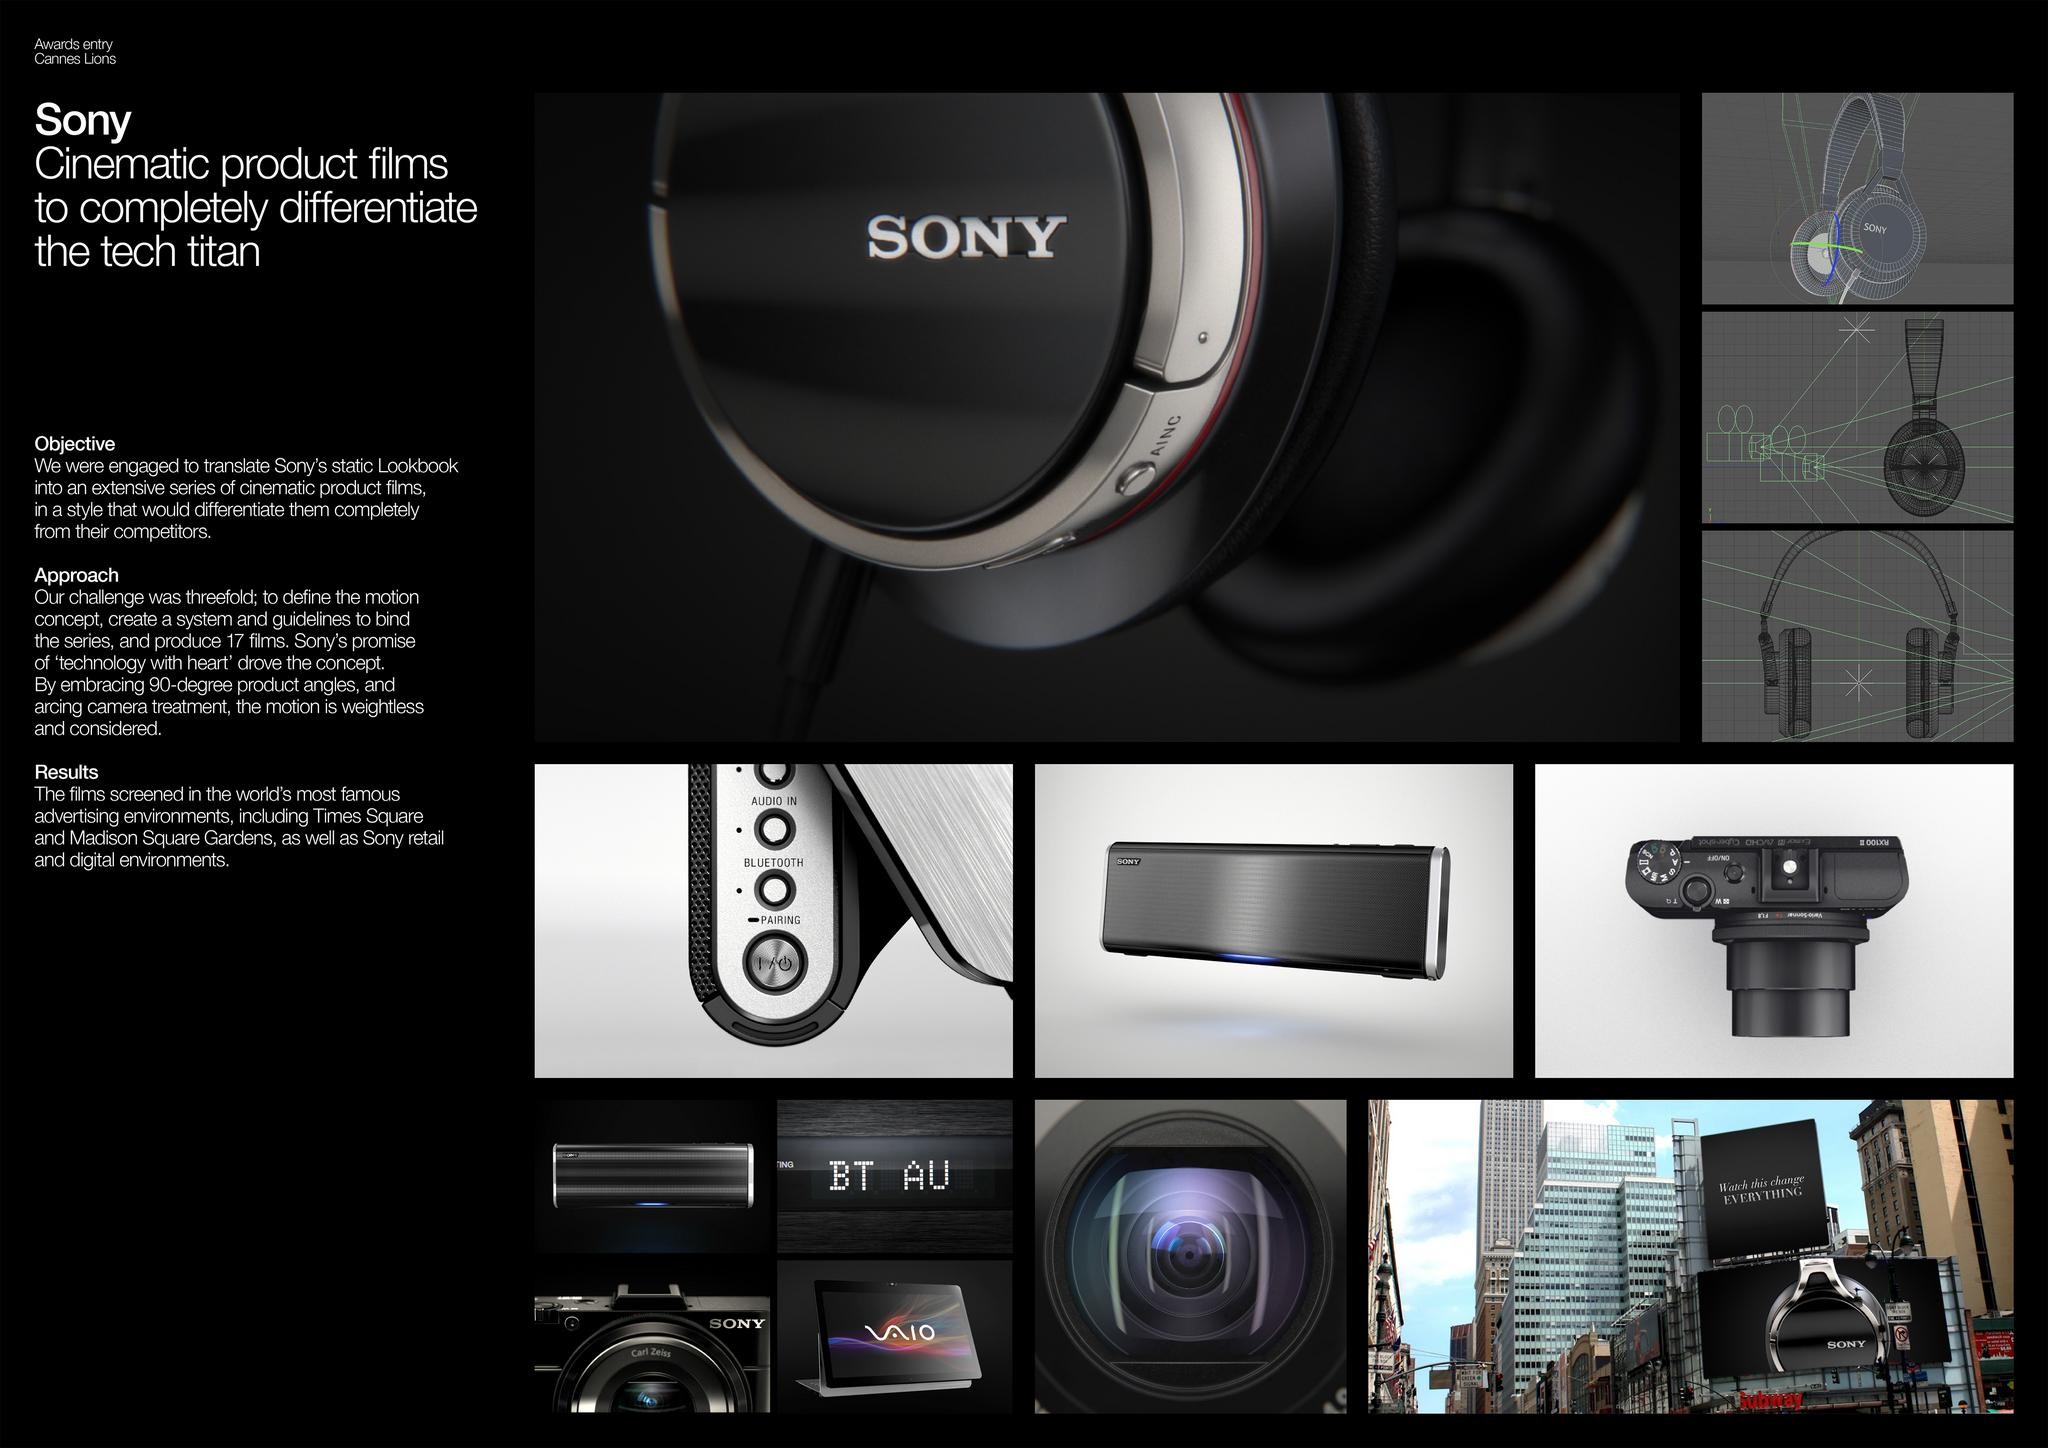 SONY PRODUCT FILMS